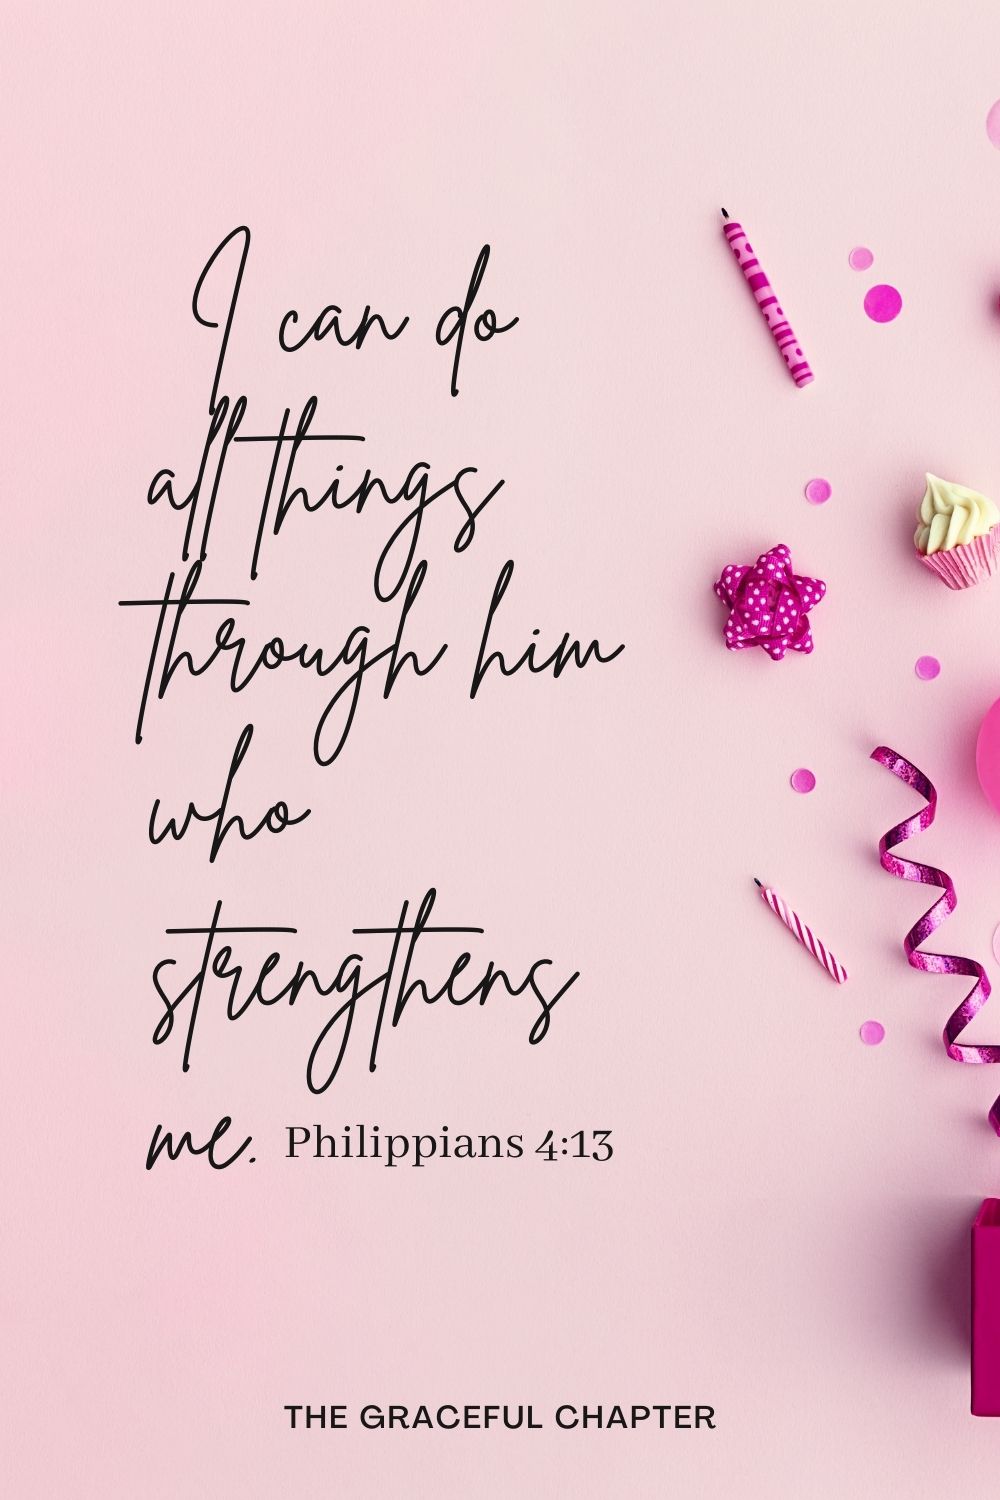  I can do all things through him who strengthens me. Philippians 4:13